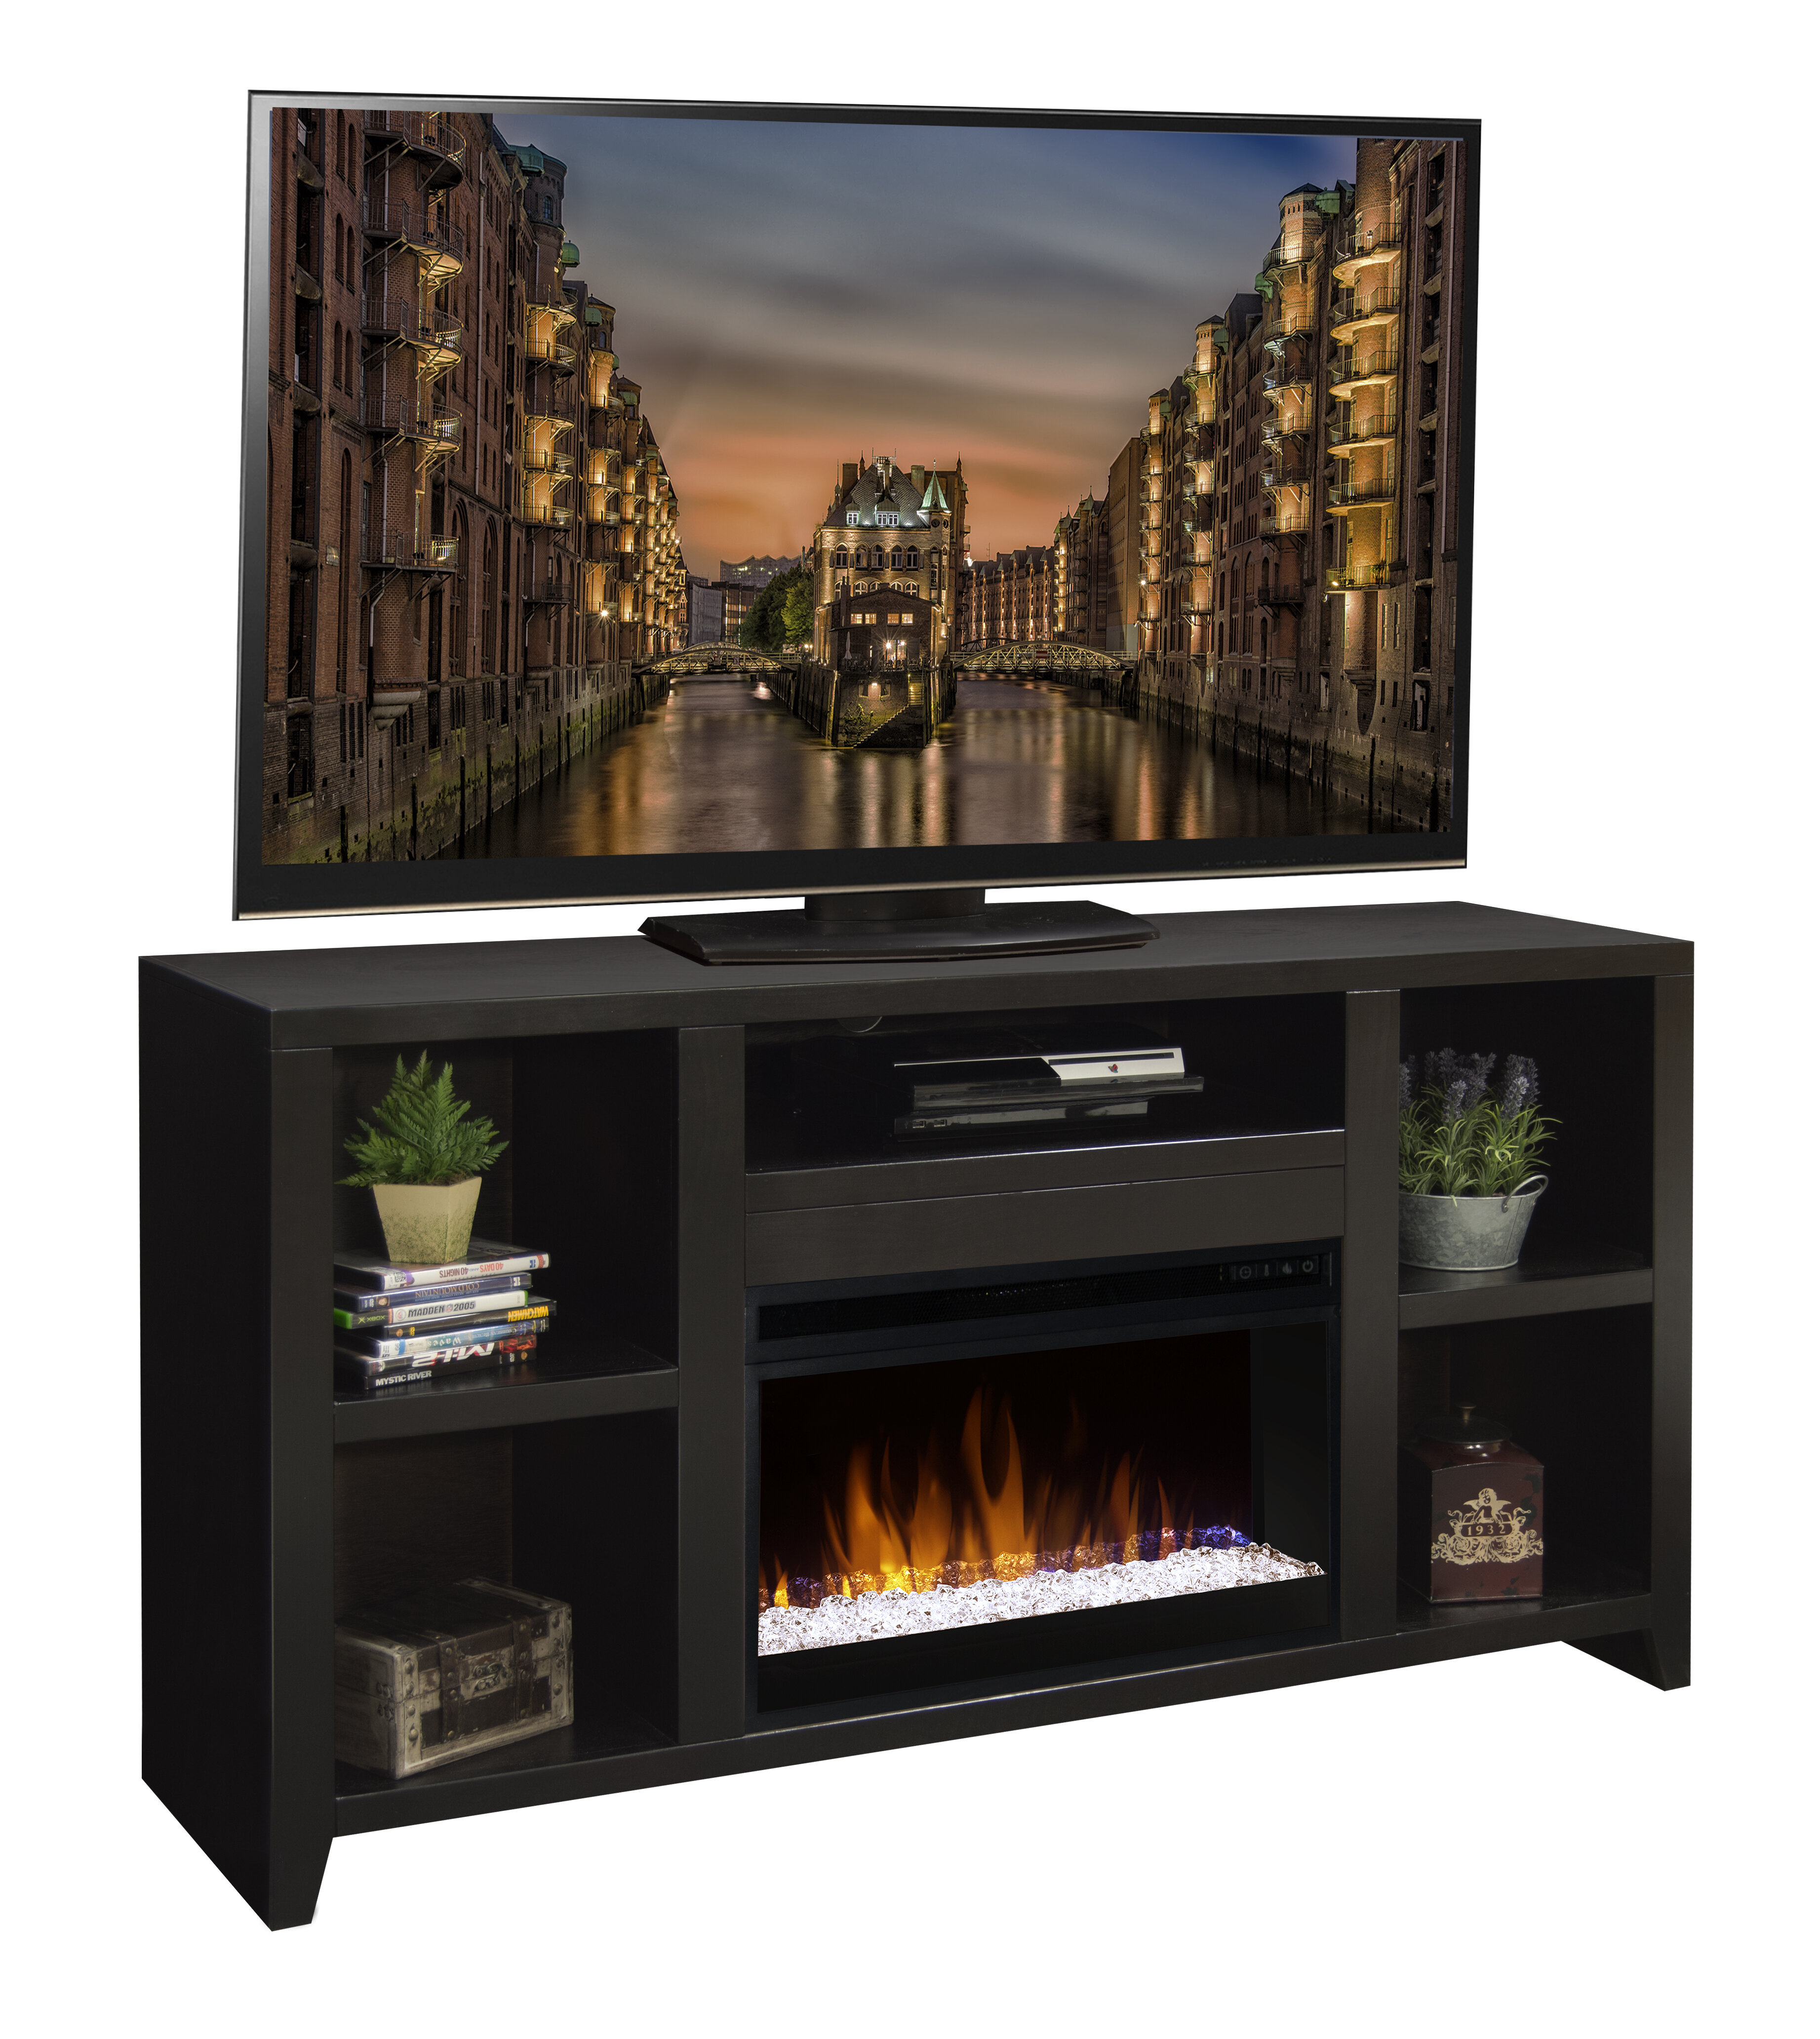 Grey Entertainment Center with Fireplace Inspirational Darby Home Co Garretson Tv Stand for Tvs Up to 65" with